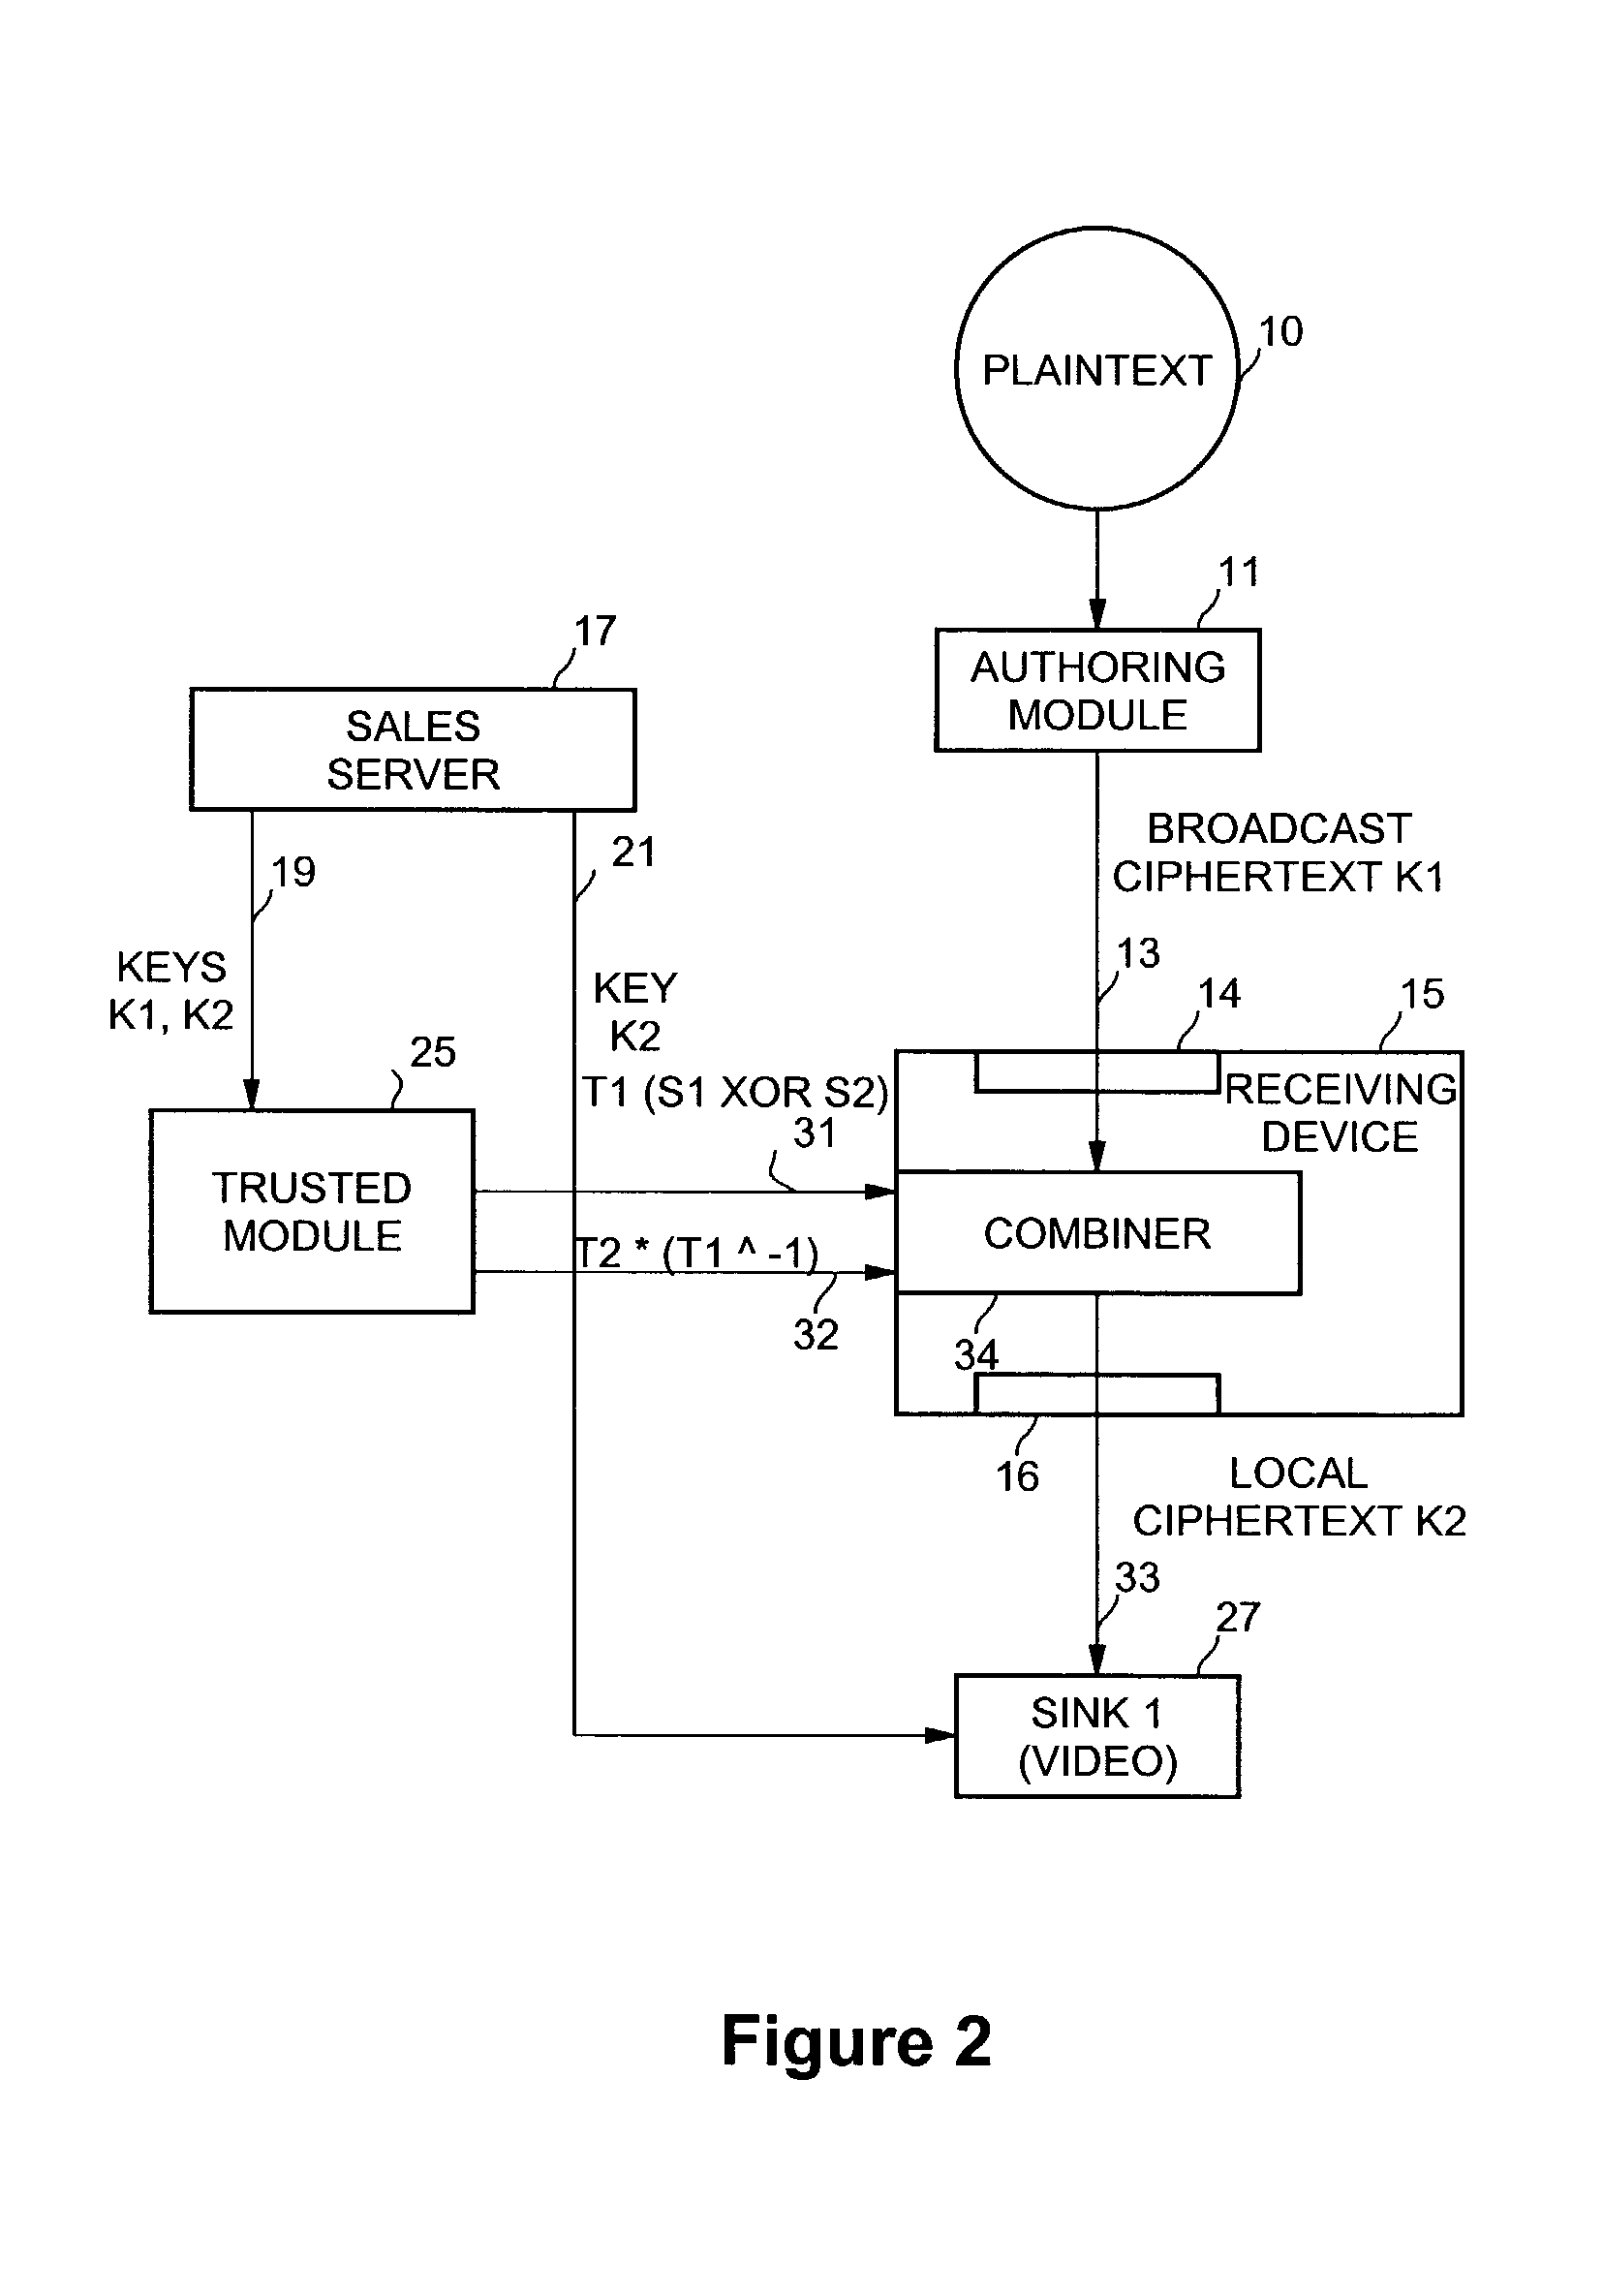 Method and apparatus for simultaneous decryption and re-encryption of publicly distributed content via stream ciphers